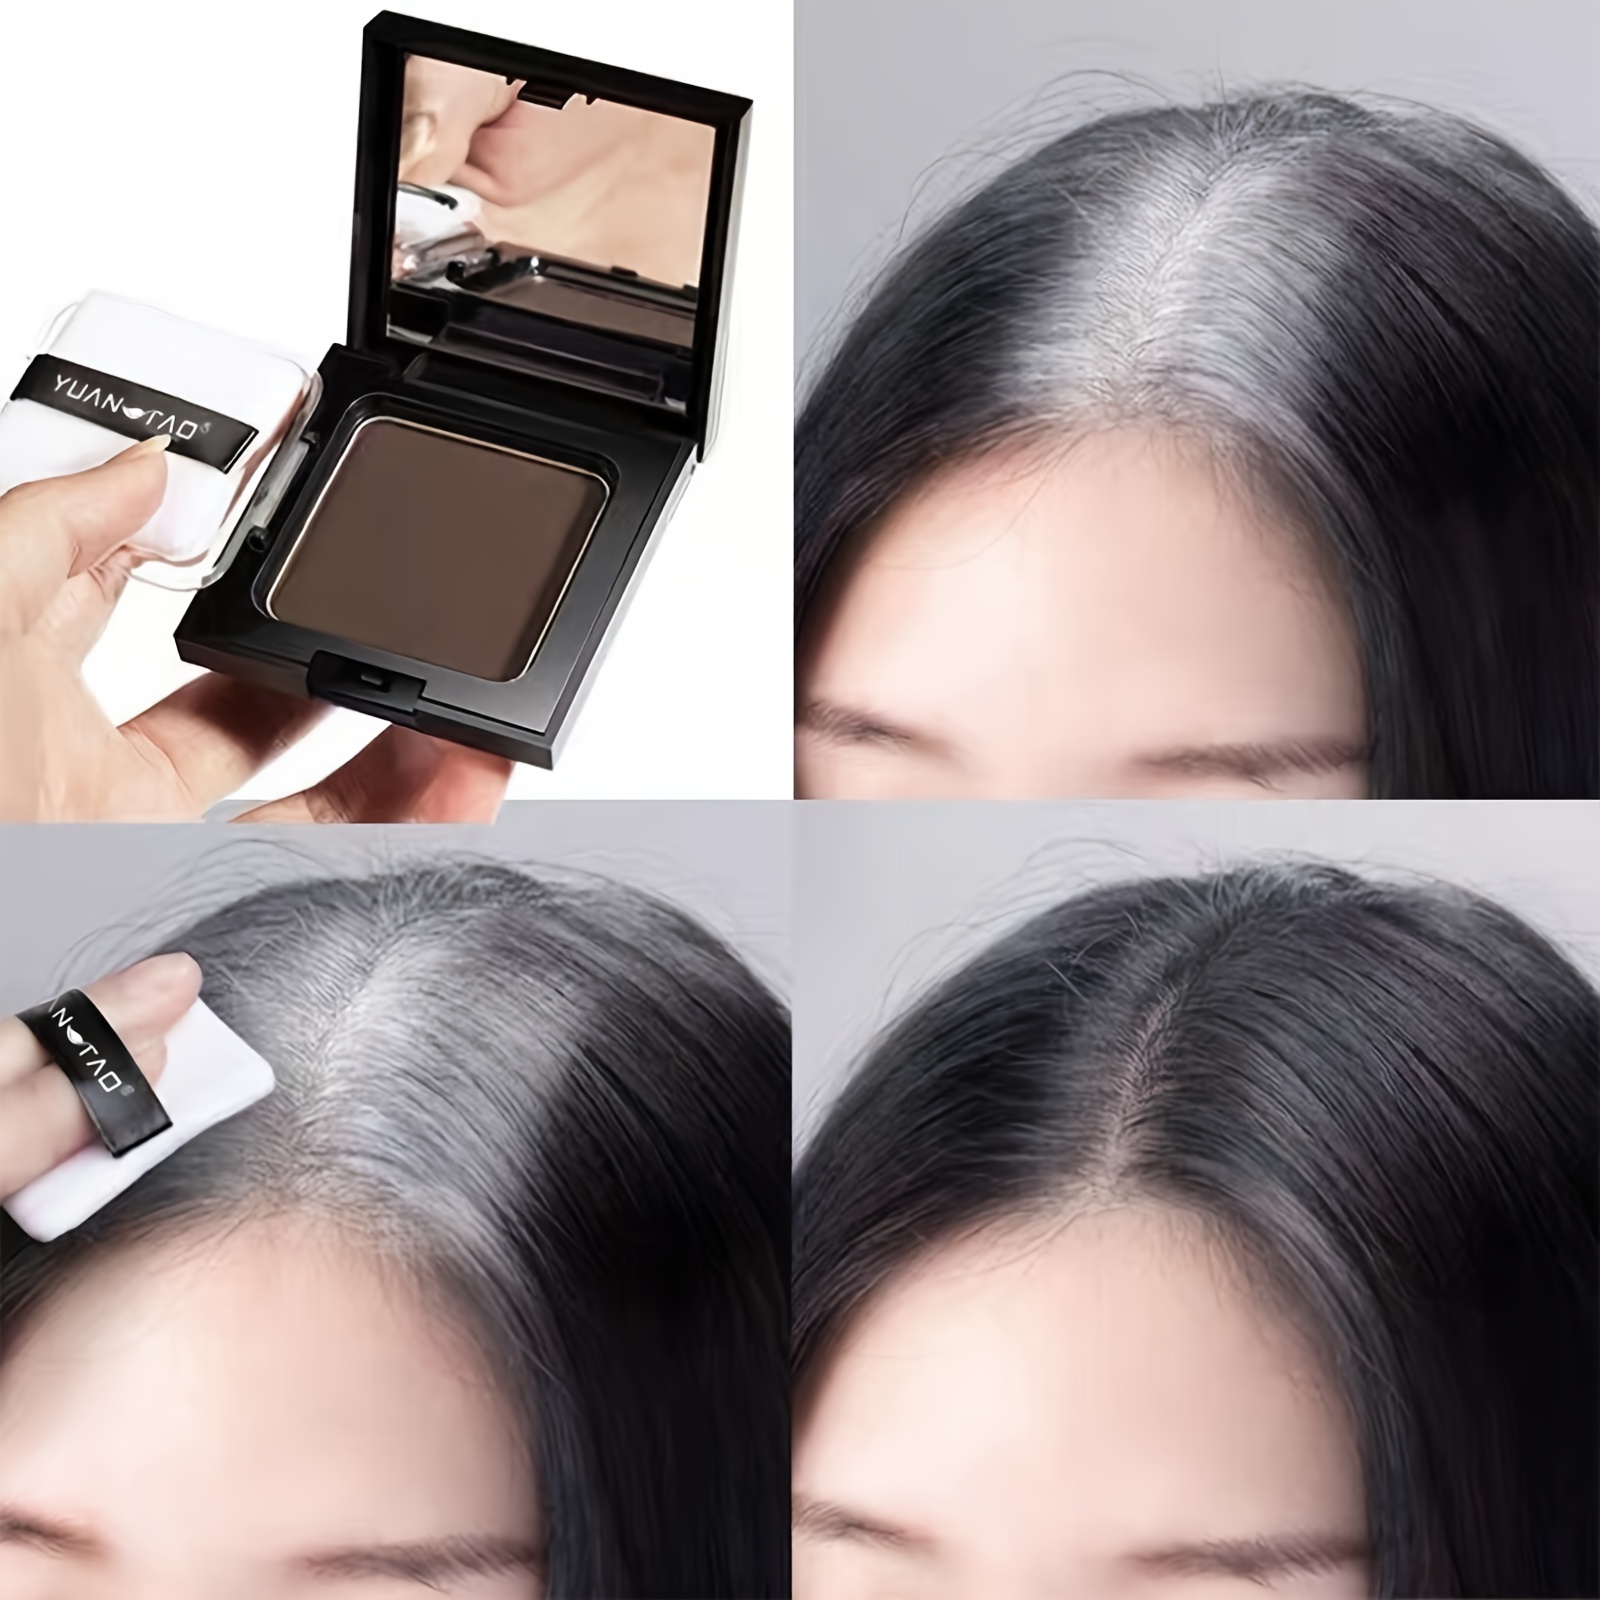 

One-time Hair Shadow Powder - Instantly Cover Gray Hair And Modify Hairline - Quick And Easy Hair Dye Hair Shadow Fiber